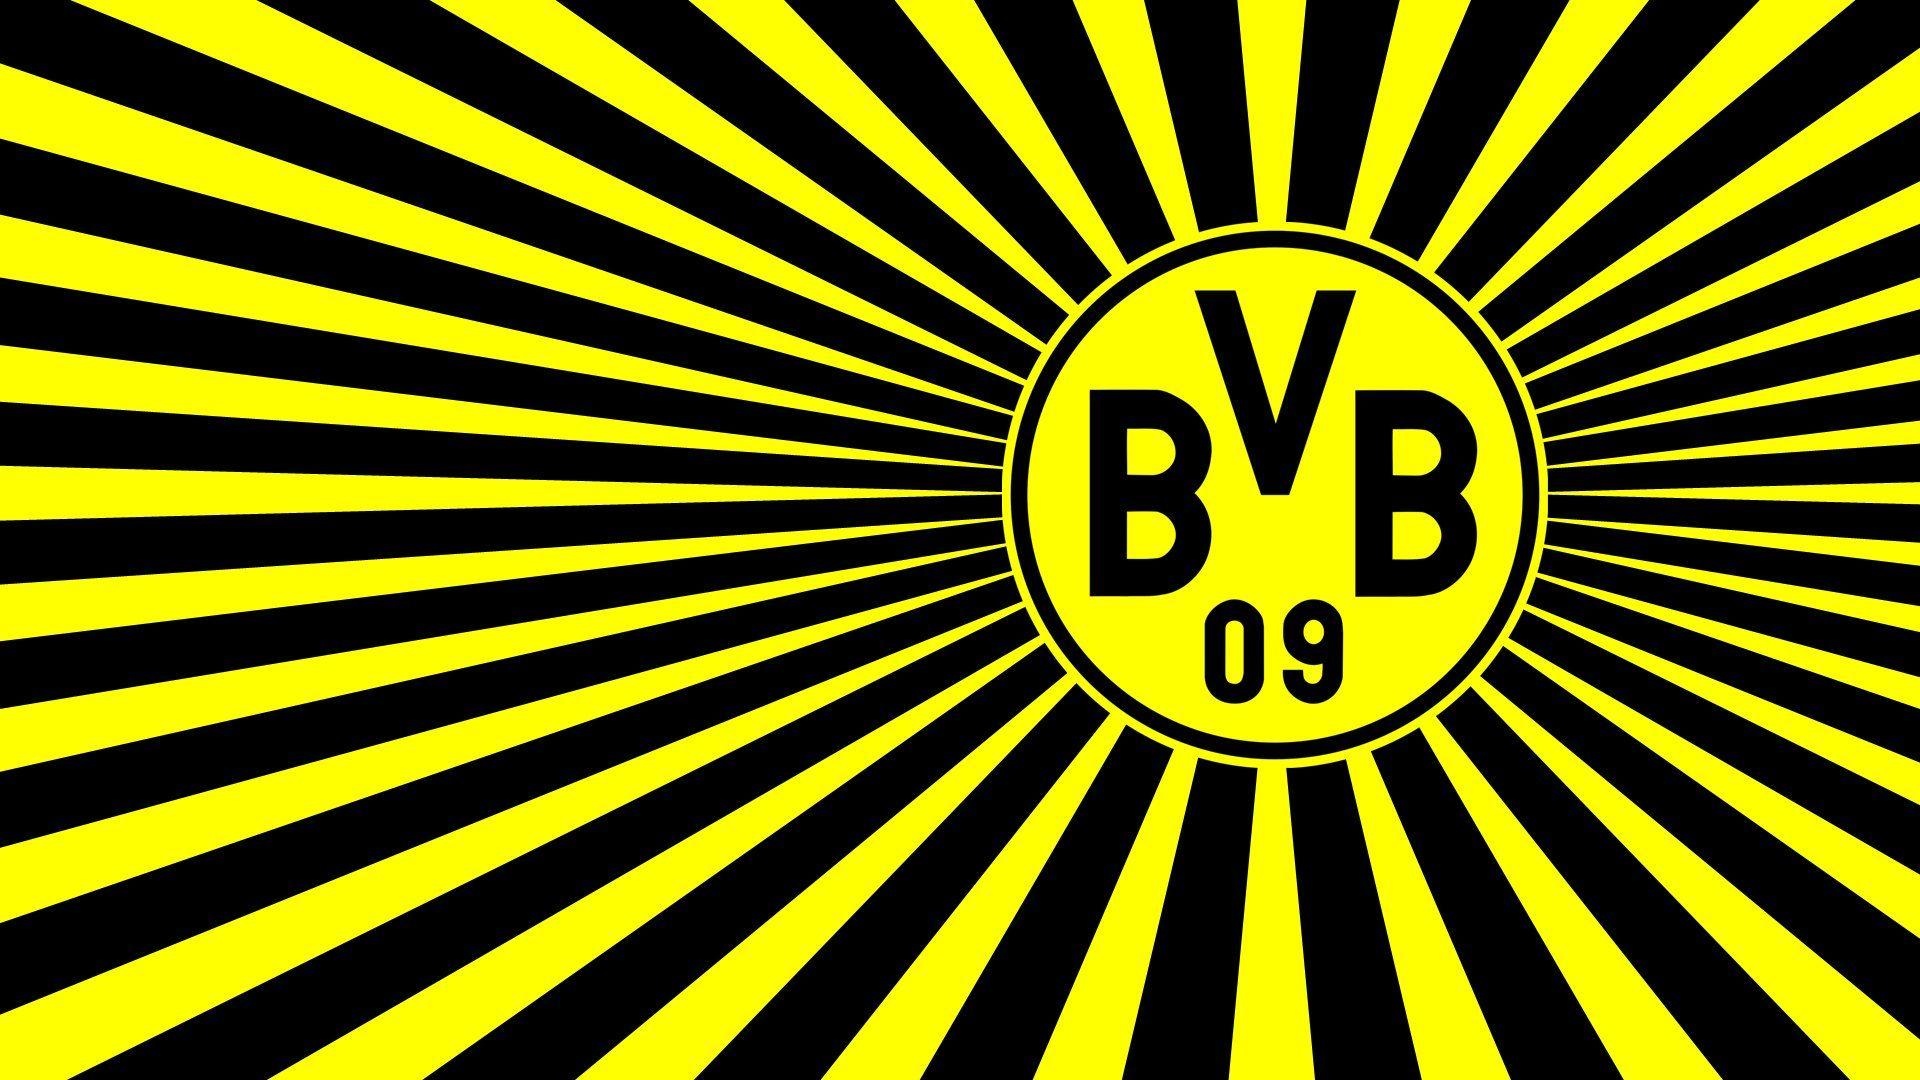 Borussia Dortmund: One of the most famous clubs in Germany. 1920x1080 Full HD Wallpaper.